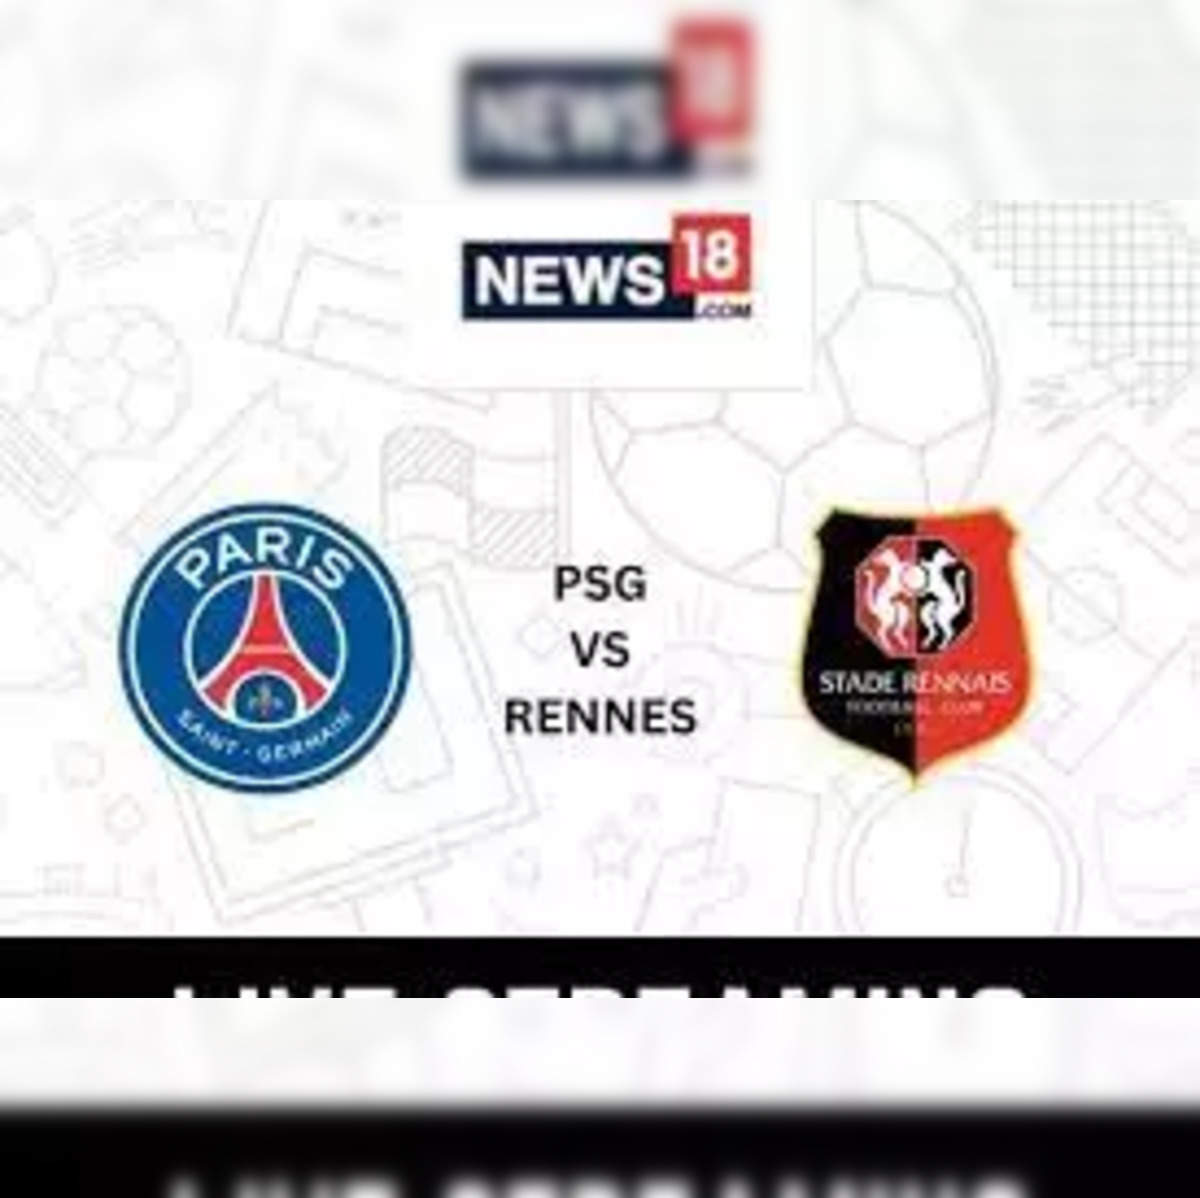 All you need to know: Nice - PSG